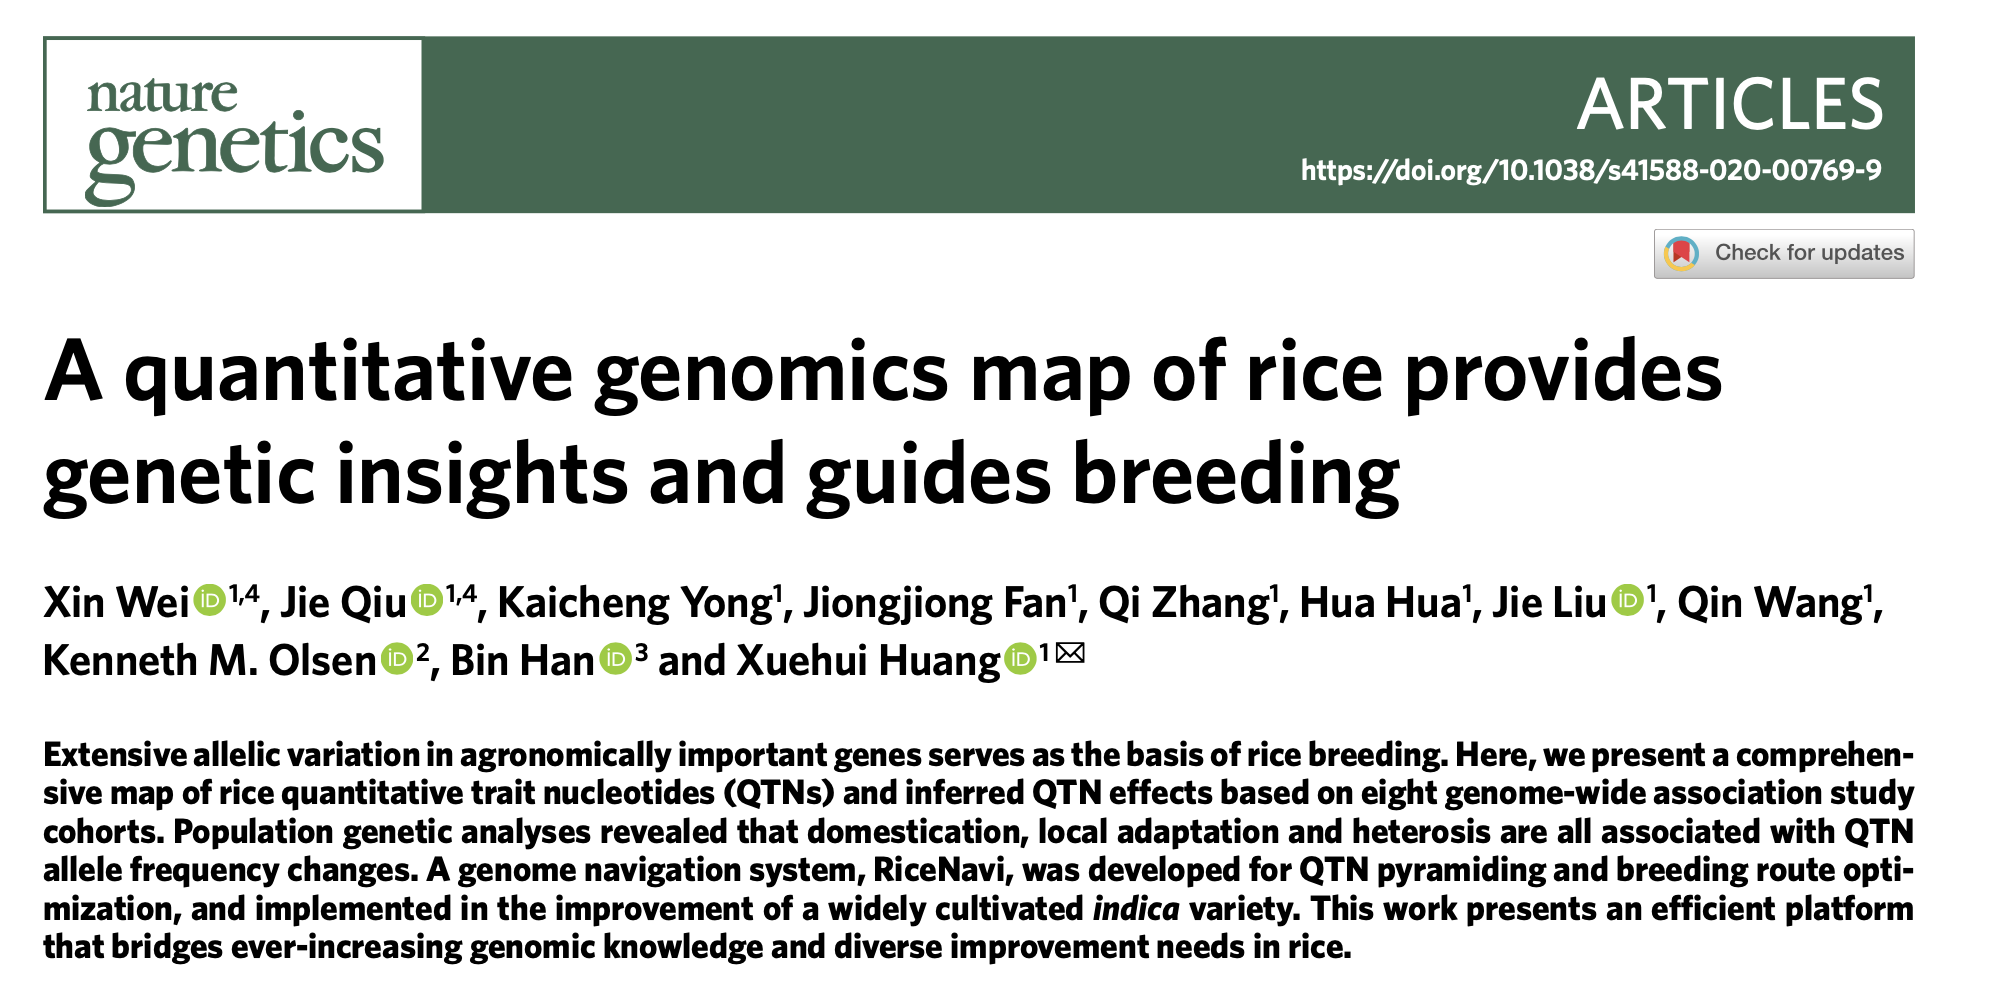 A quantitative genomics map of rice provides genetic insights and guides breeding